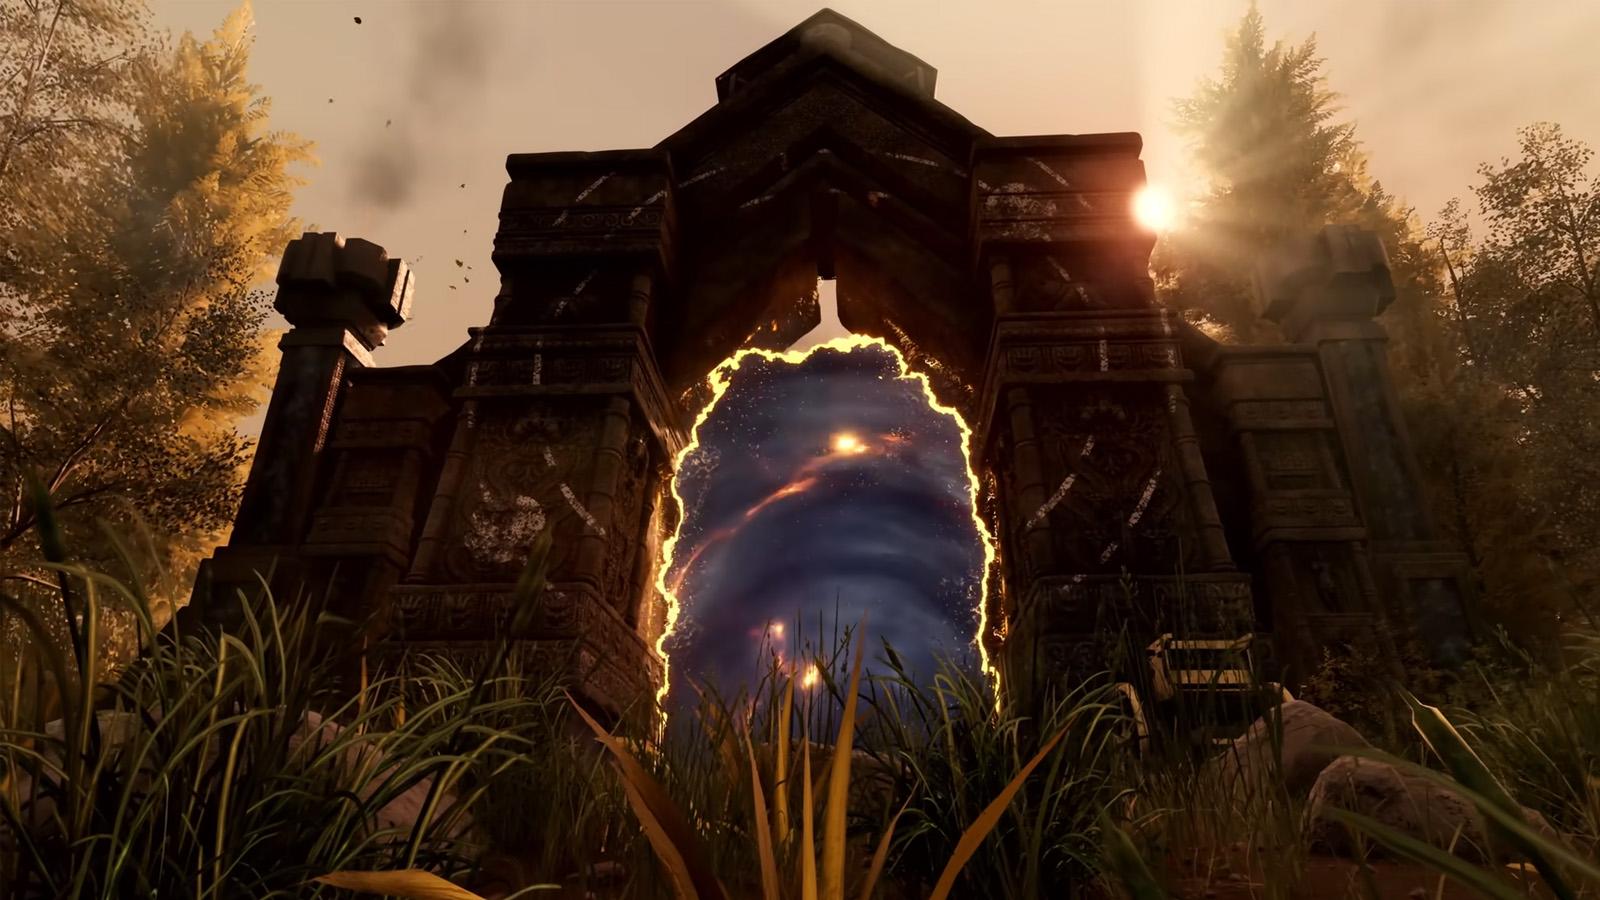 A screencap of a portal from the Nightingale trailer